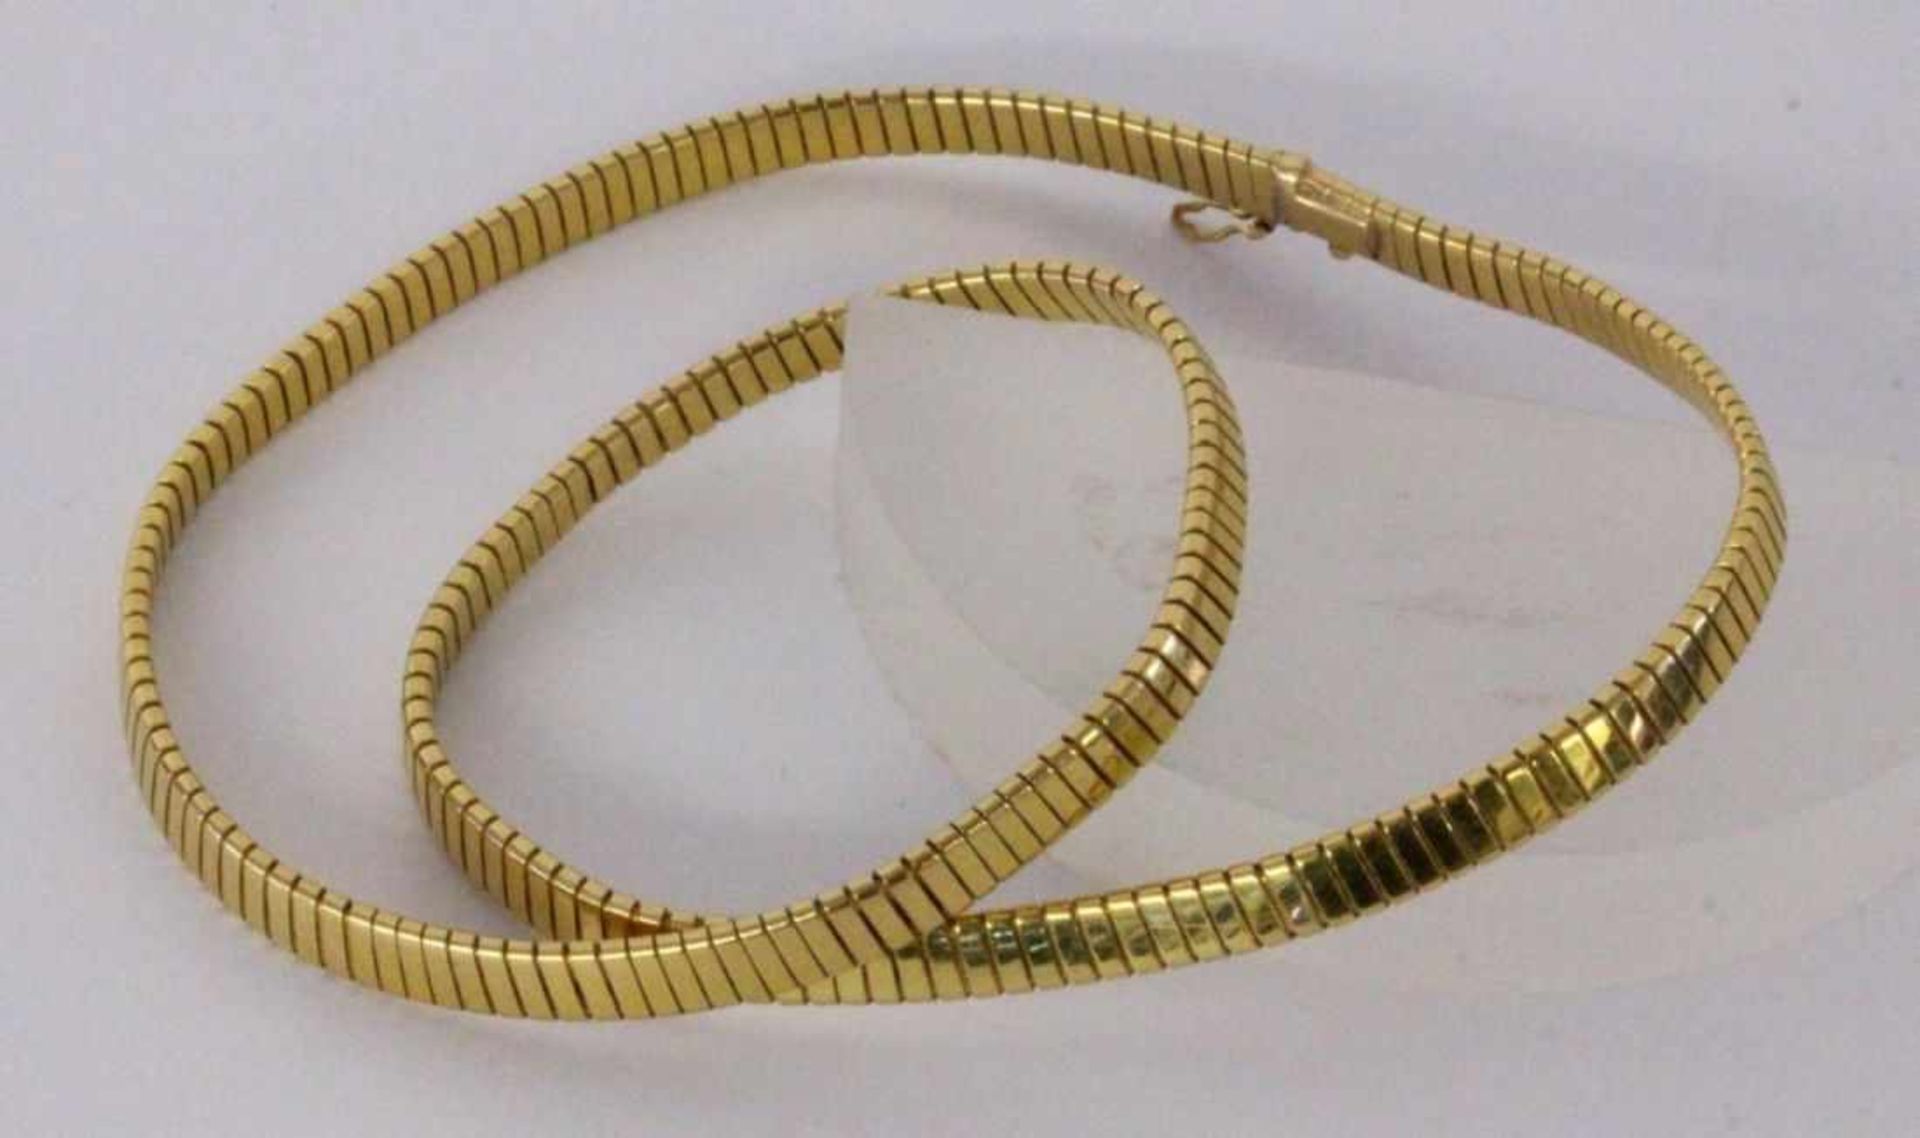 A NECKLACE, 750/000 yellow gold. 48 cm long, approx. 29 grams. Keywords: jewellery,